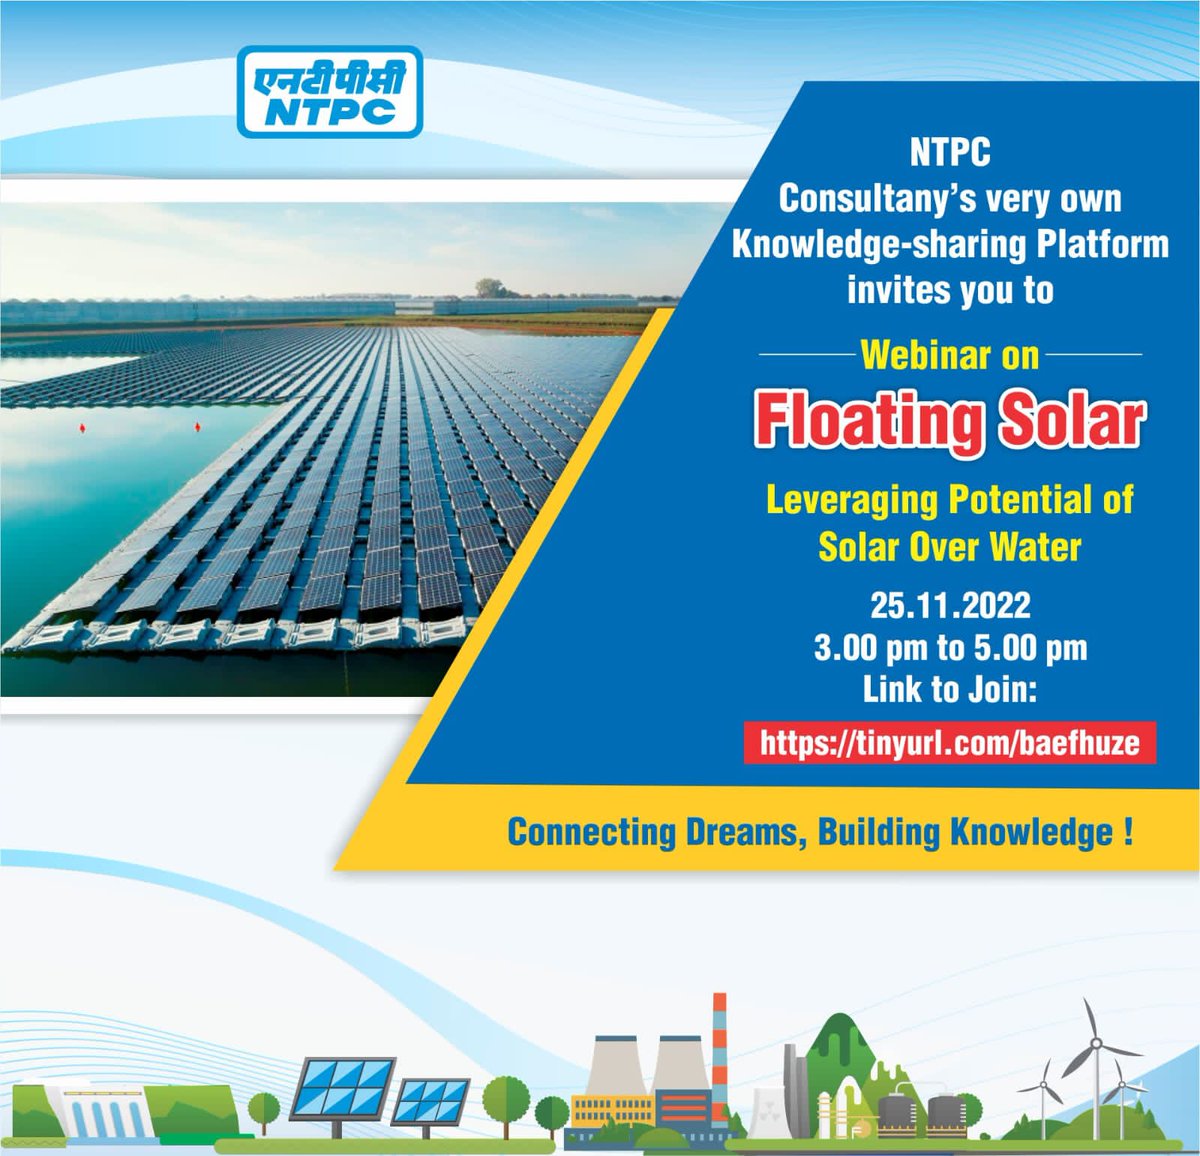 NTPC Webinar on 'Floating Solar- Leveraging Potential of Solar over Water' on 25 Nov from 3:00-5:00 PM. To attend the webinar, kindly register on the link below: forms.gle/P8HZc63QAEYYz5… For any issues please get back to us at consultancy@ntpc.co.in @OfficeOfRKSingh